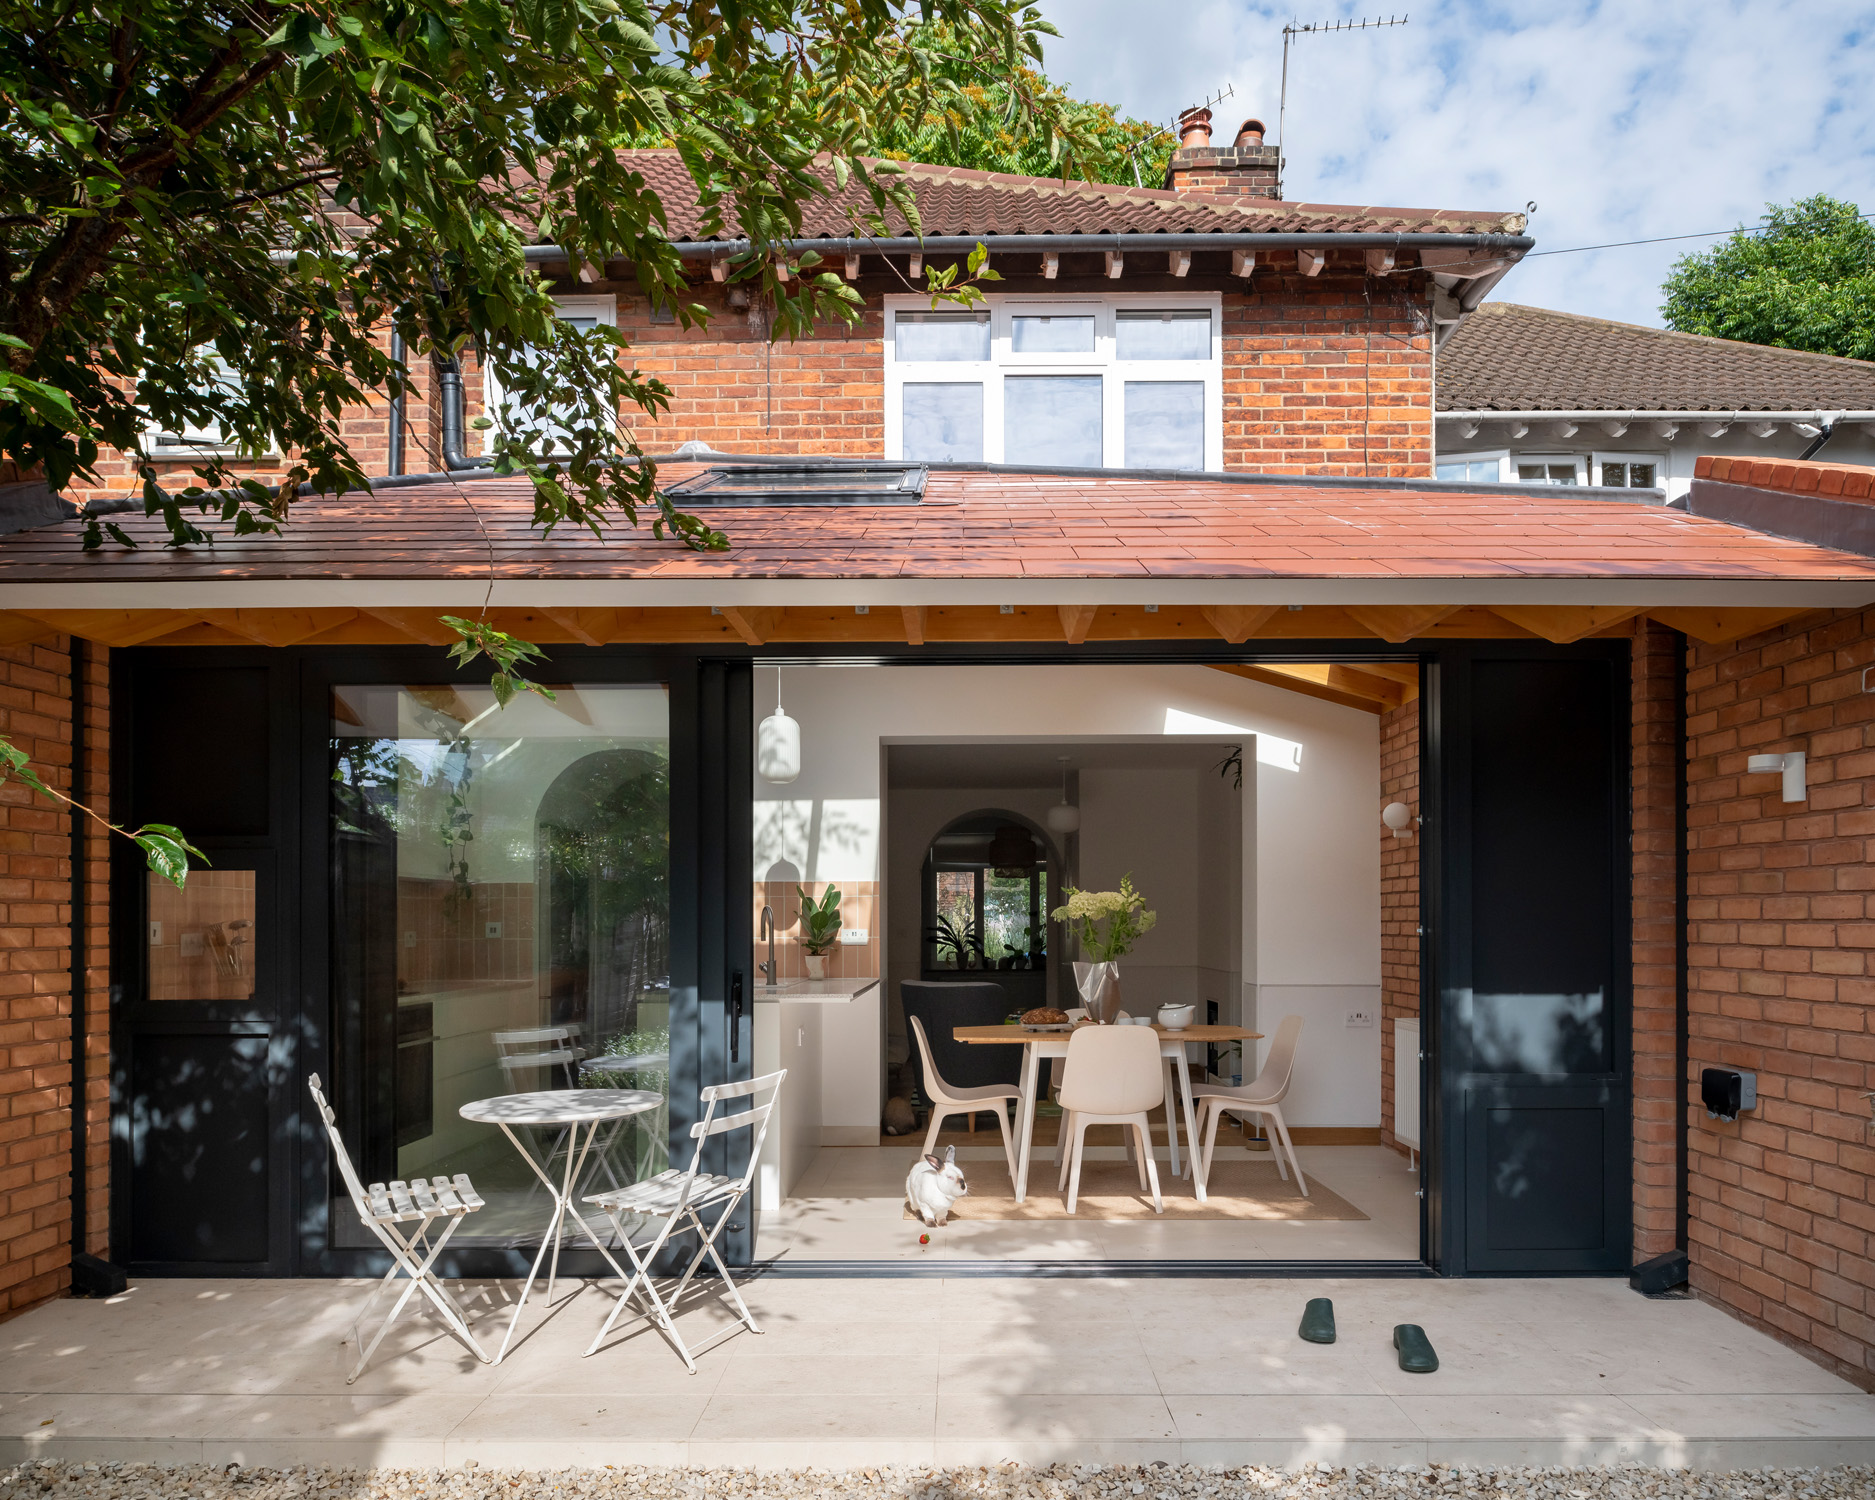 Exterior of Hutch House by Nintim Architects - contemporary architecture design studio in London